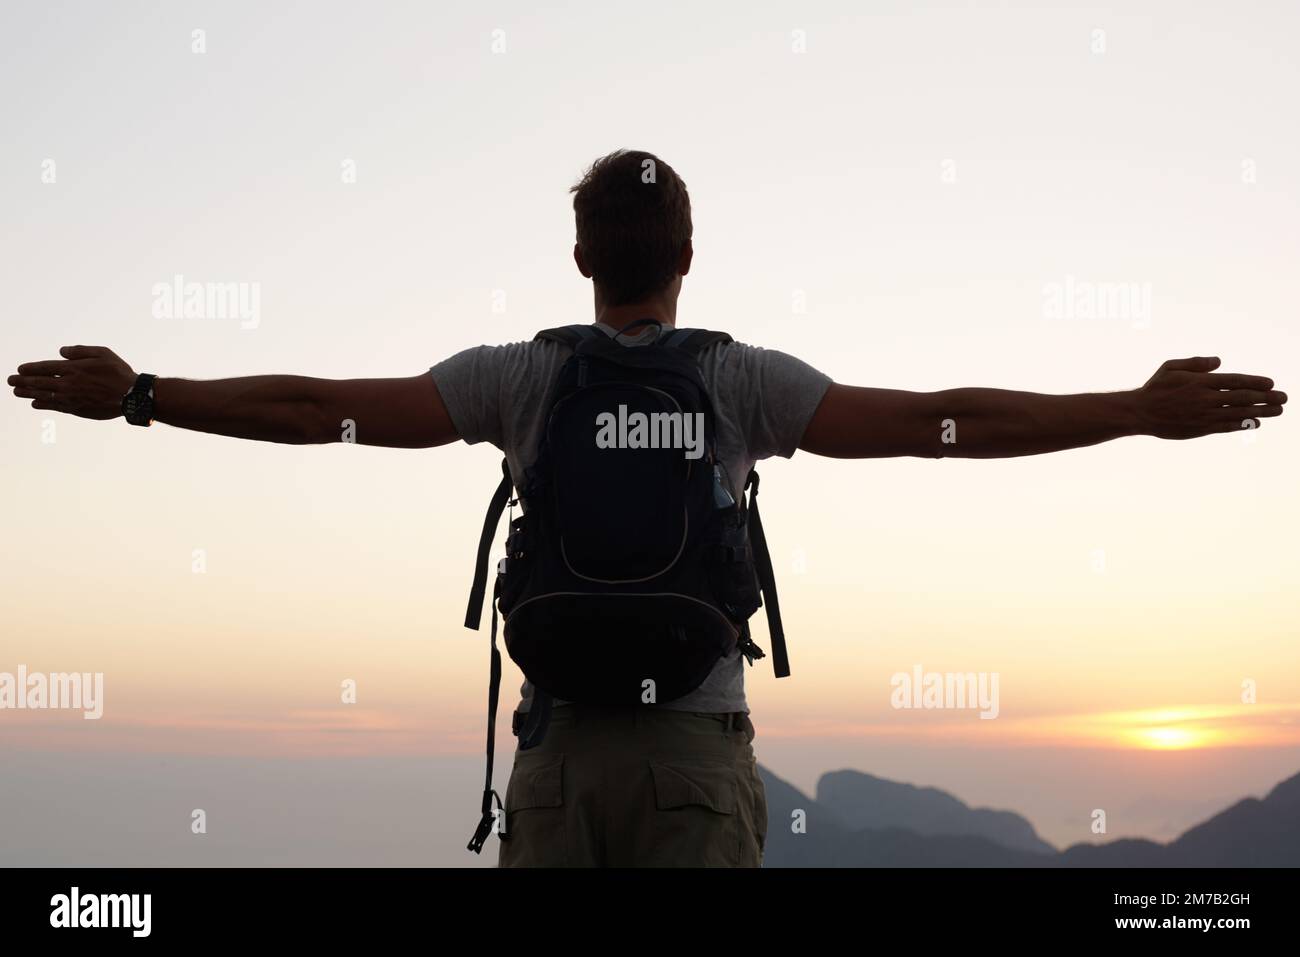 Taking a moment to breathe it all in. Silhouette shot of a young man standing against the sky. Stock Photo